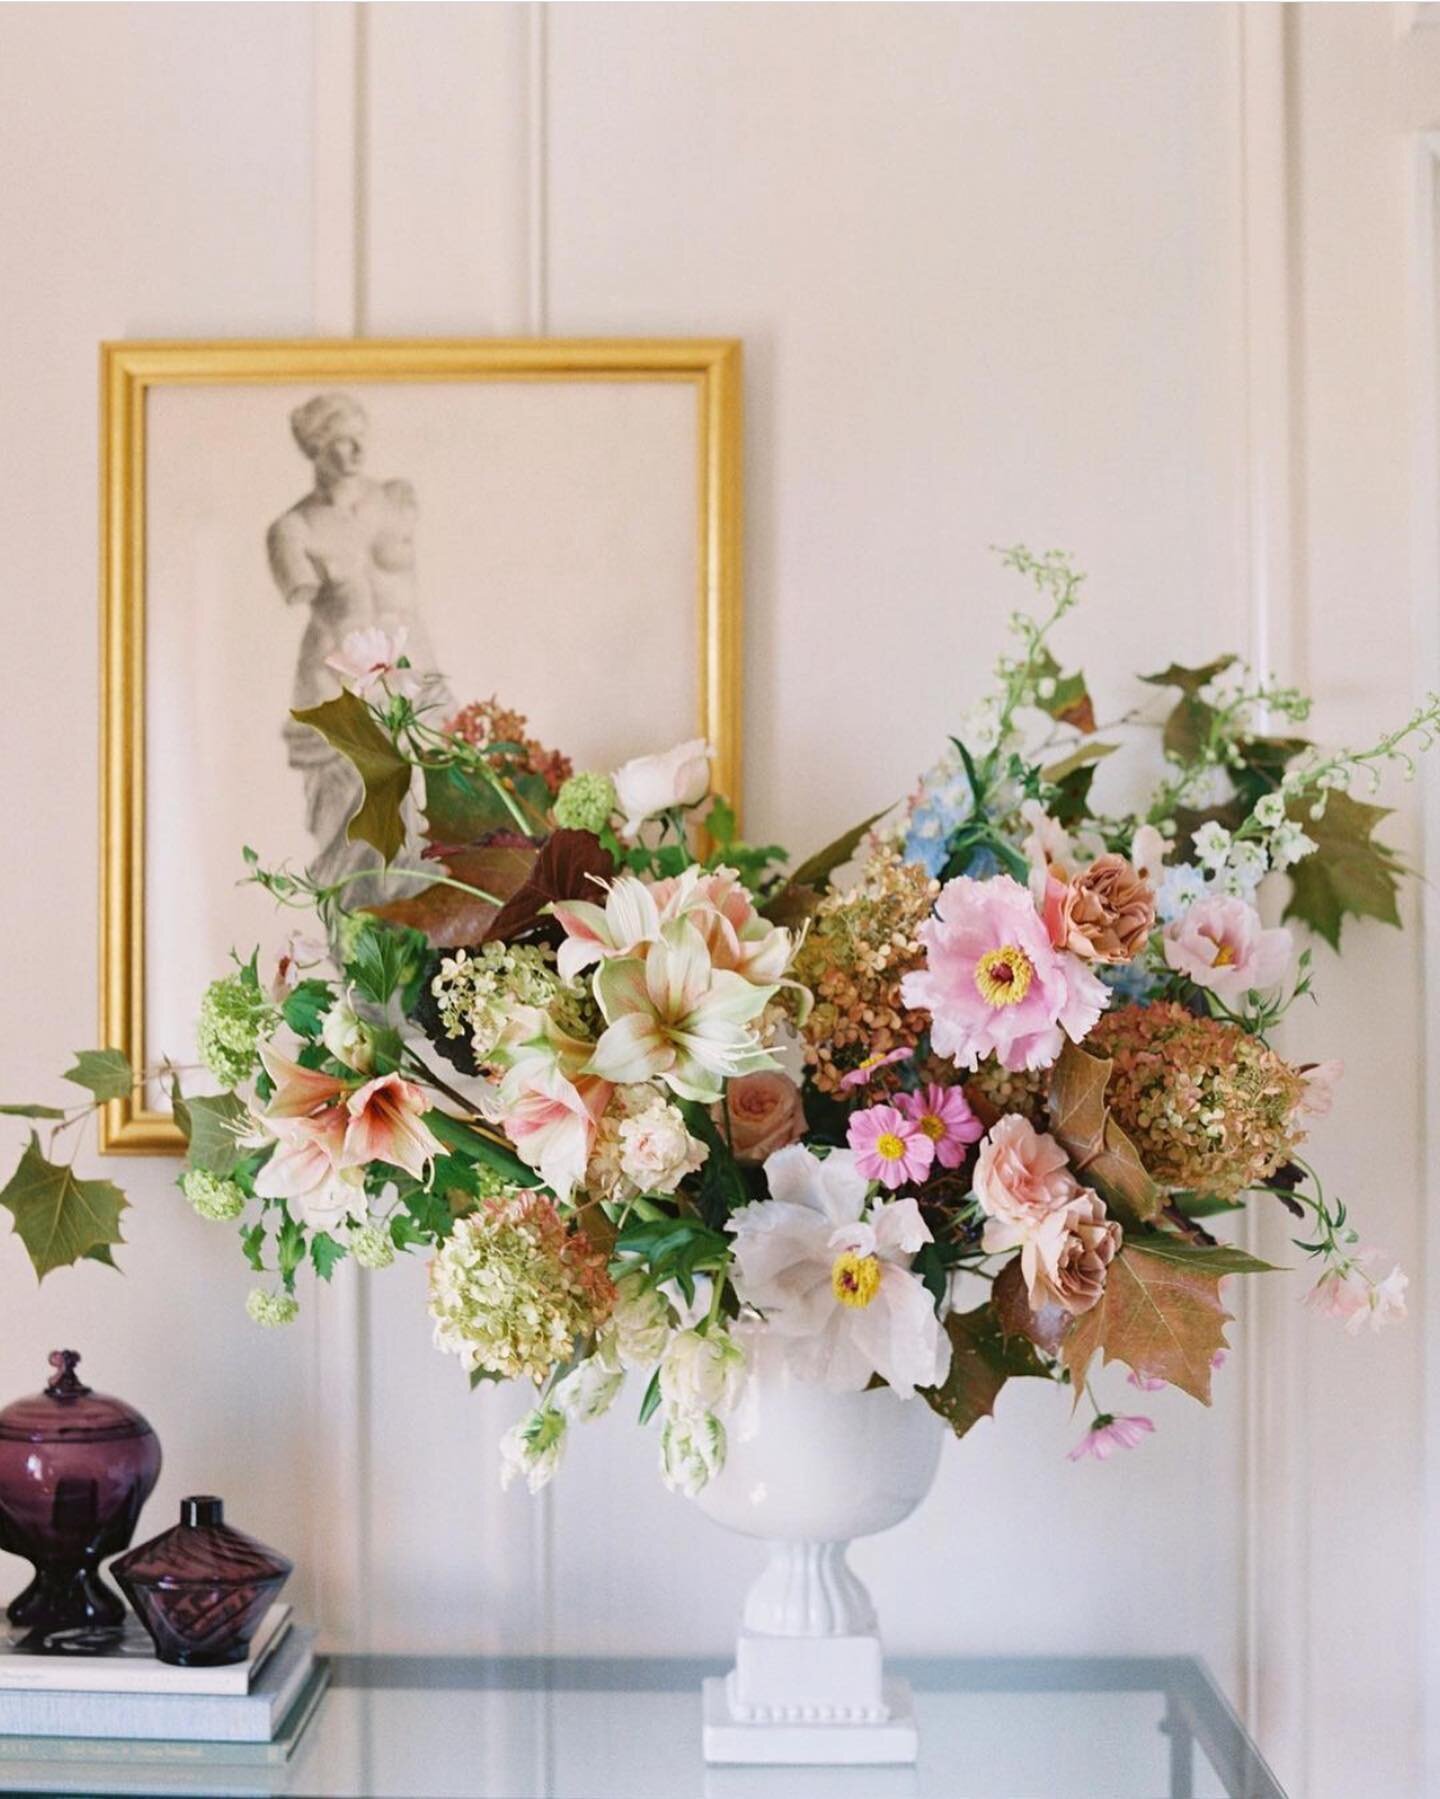 Beautiful blooms to inspire your Sunday afternoon. This incredible team never ceases to inspire me with their creativity and design. 

Photo: @charlastorey 
Florals: @maxowensdesign 
Venue: @thecommodoreperryestate 
Video: @peytonfrank 
Styling: @gab